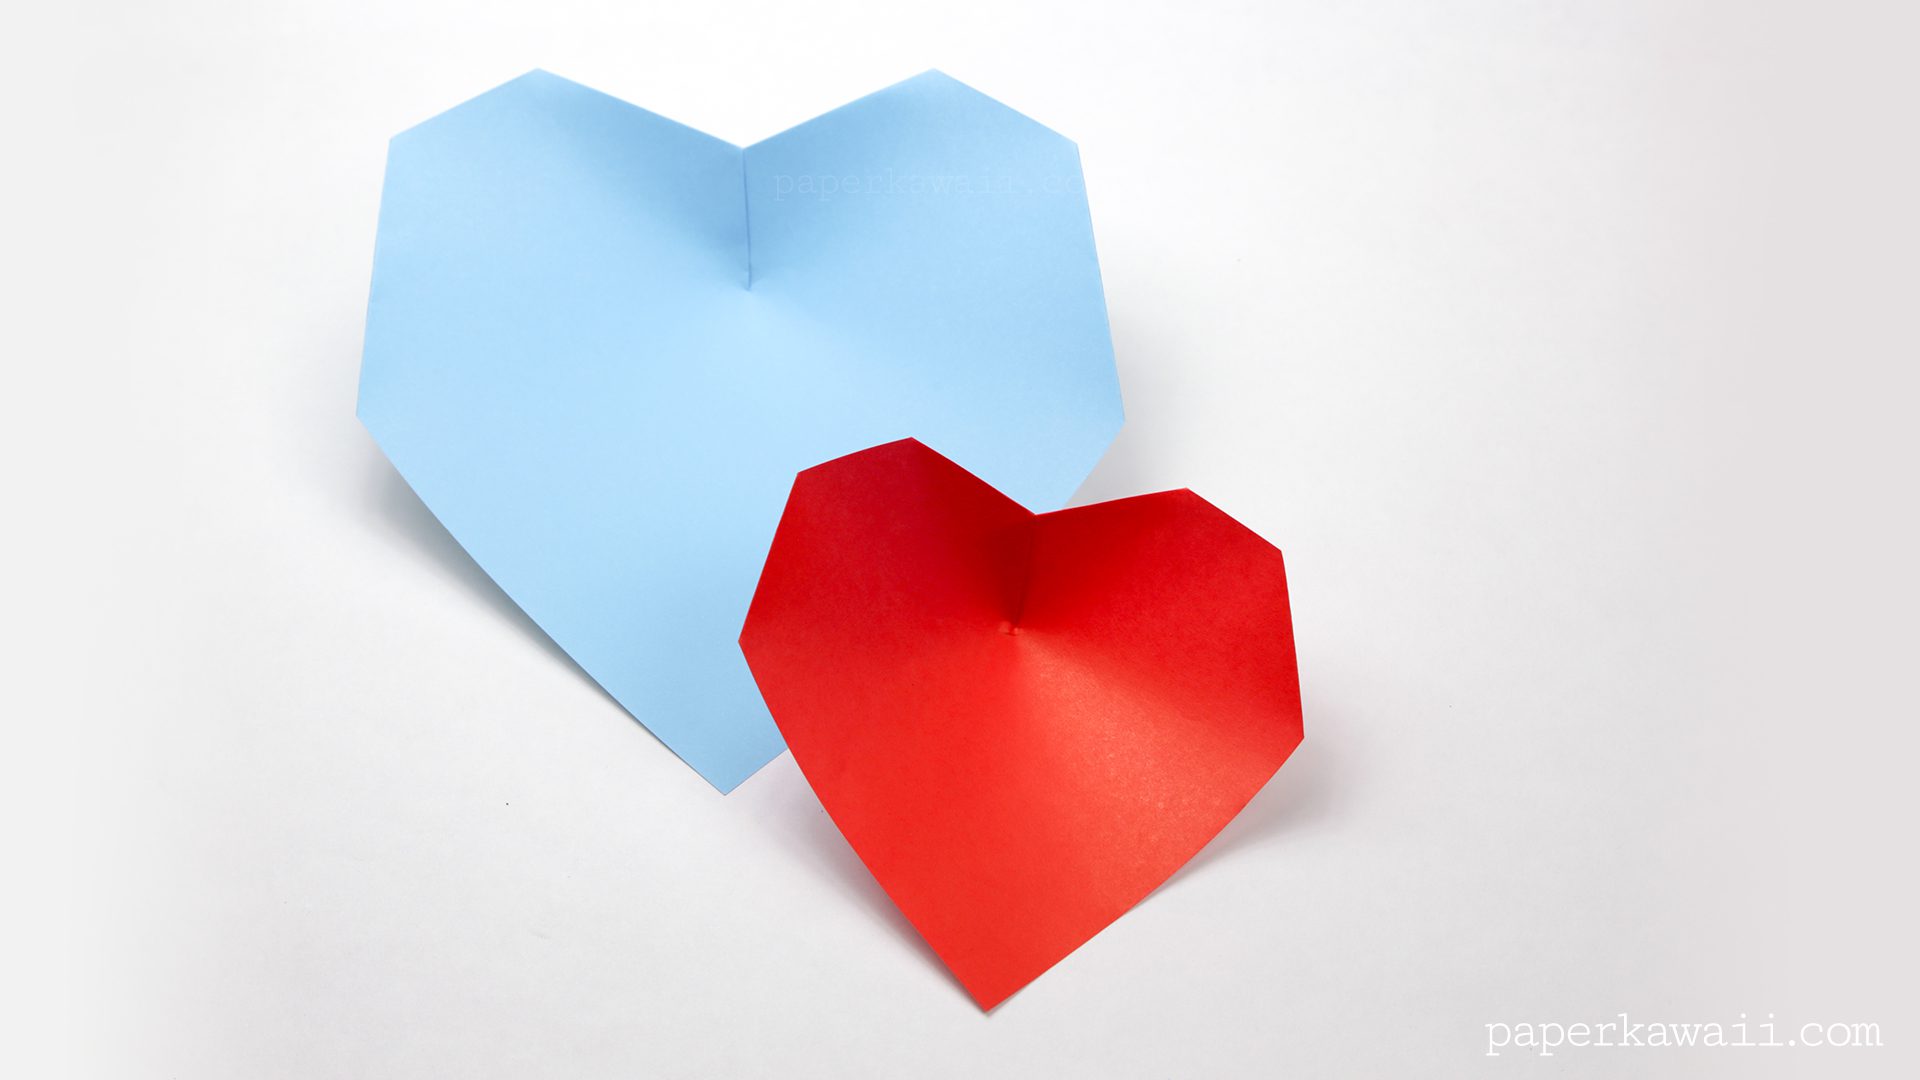 Super easy origami heart instructions #origami